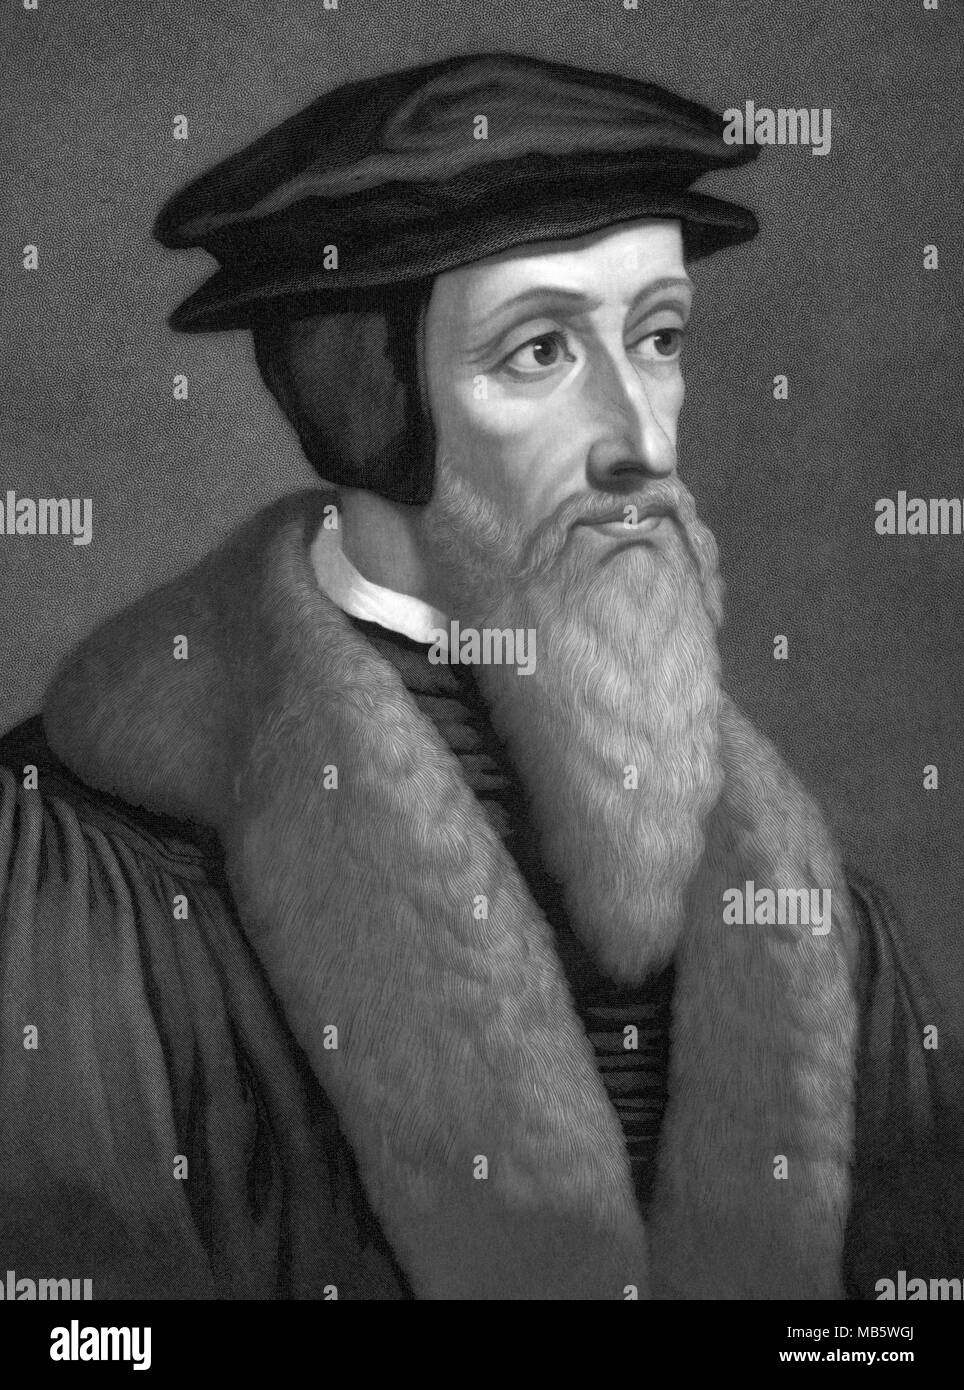 John Calvin (1509–1564) was a French Protestant theologian, pastor and key reformer in Geneva, Switzerland during the Protestant Reformation. His views of Christian theology later become known as Calvinism. Stock Photo